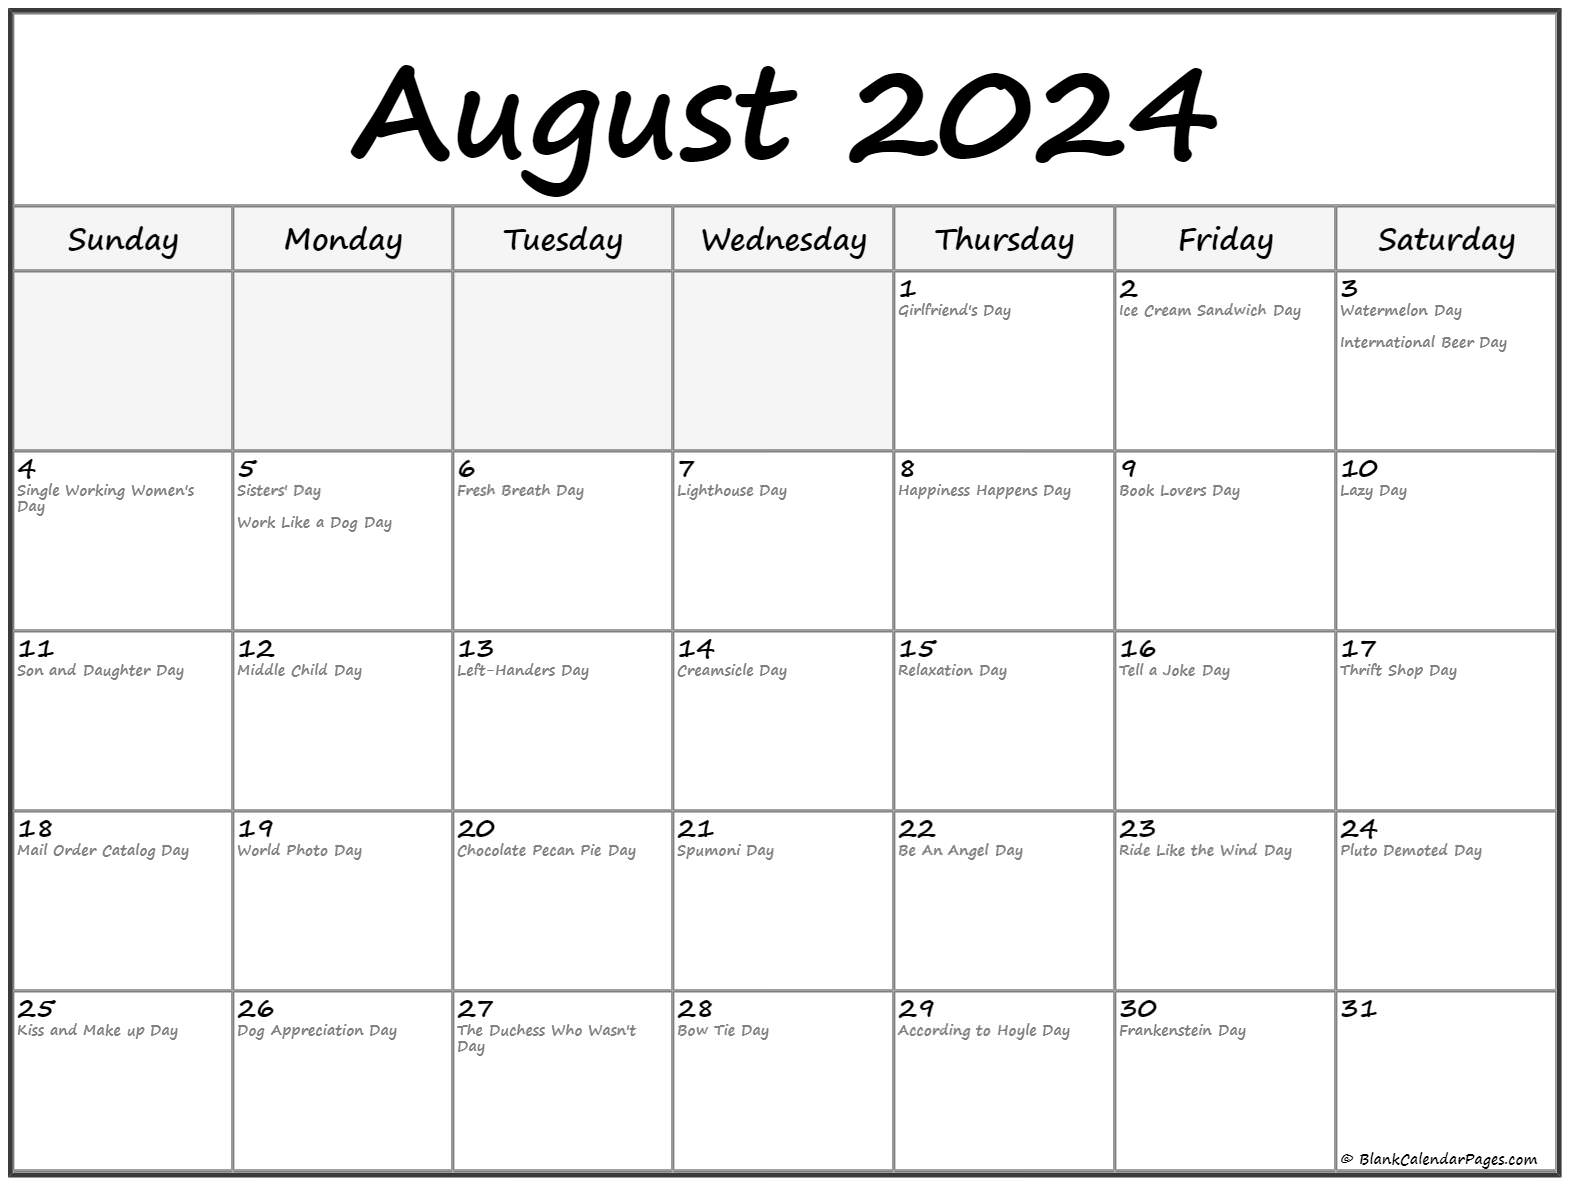 37+ Calendar 2022 August Bank Holiday Pics – All in Here